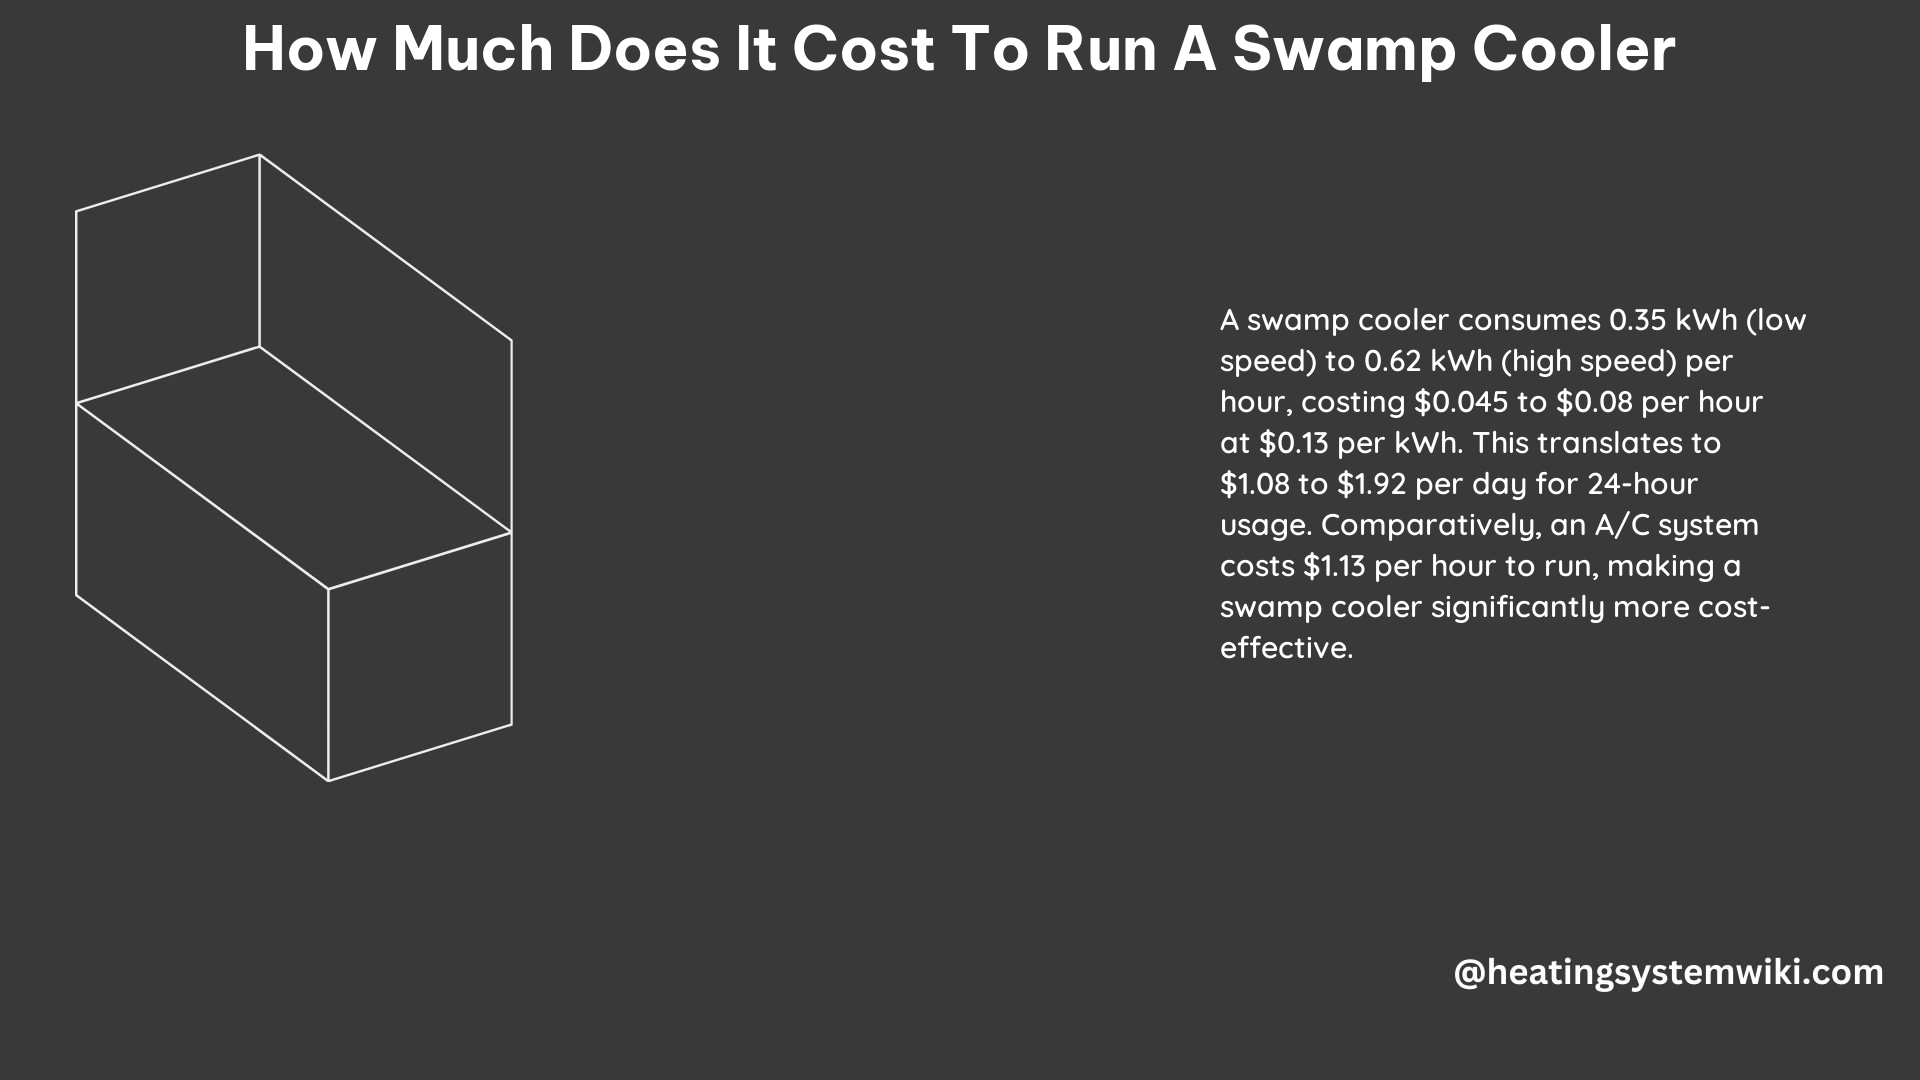 How Much Does It Cost to Run a Swamp Cooler